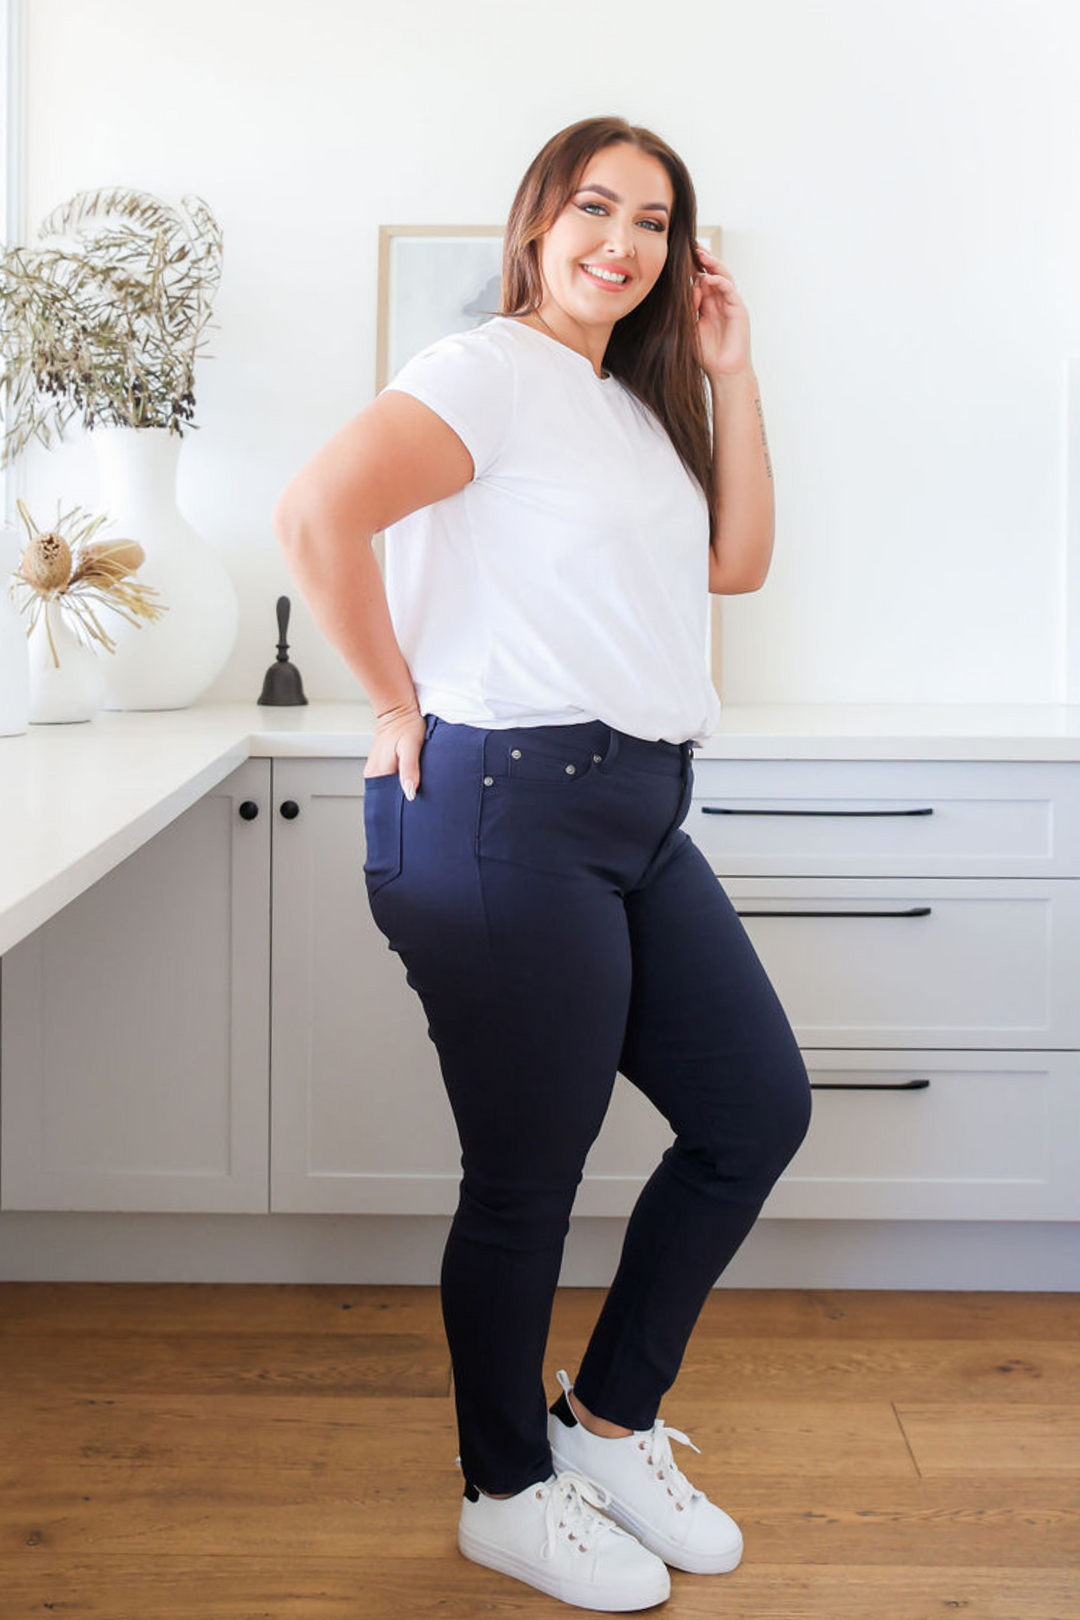 Ladies Jeans - Navy - Stretch Jeans - Functional Front + Back Pockets - Plus Size Jeans - Sizes 6 - 26 - Delta Jeans Navy Right Side Full Length View Size 14 - Daisy's Closet